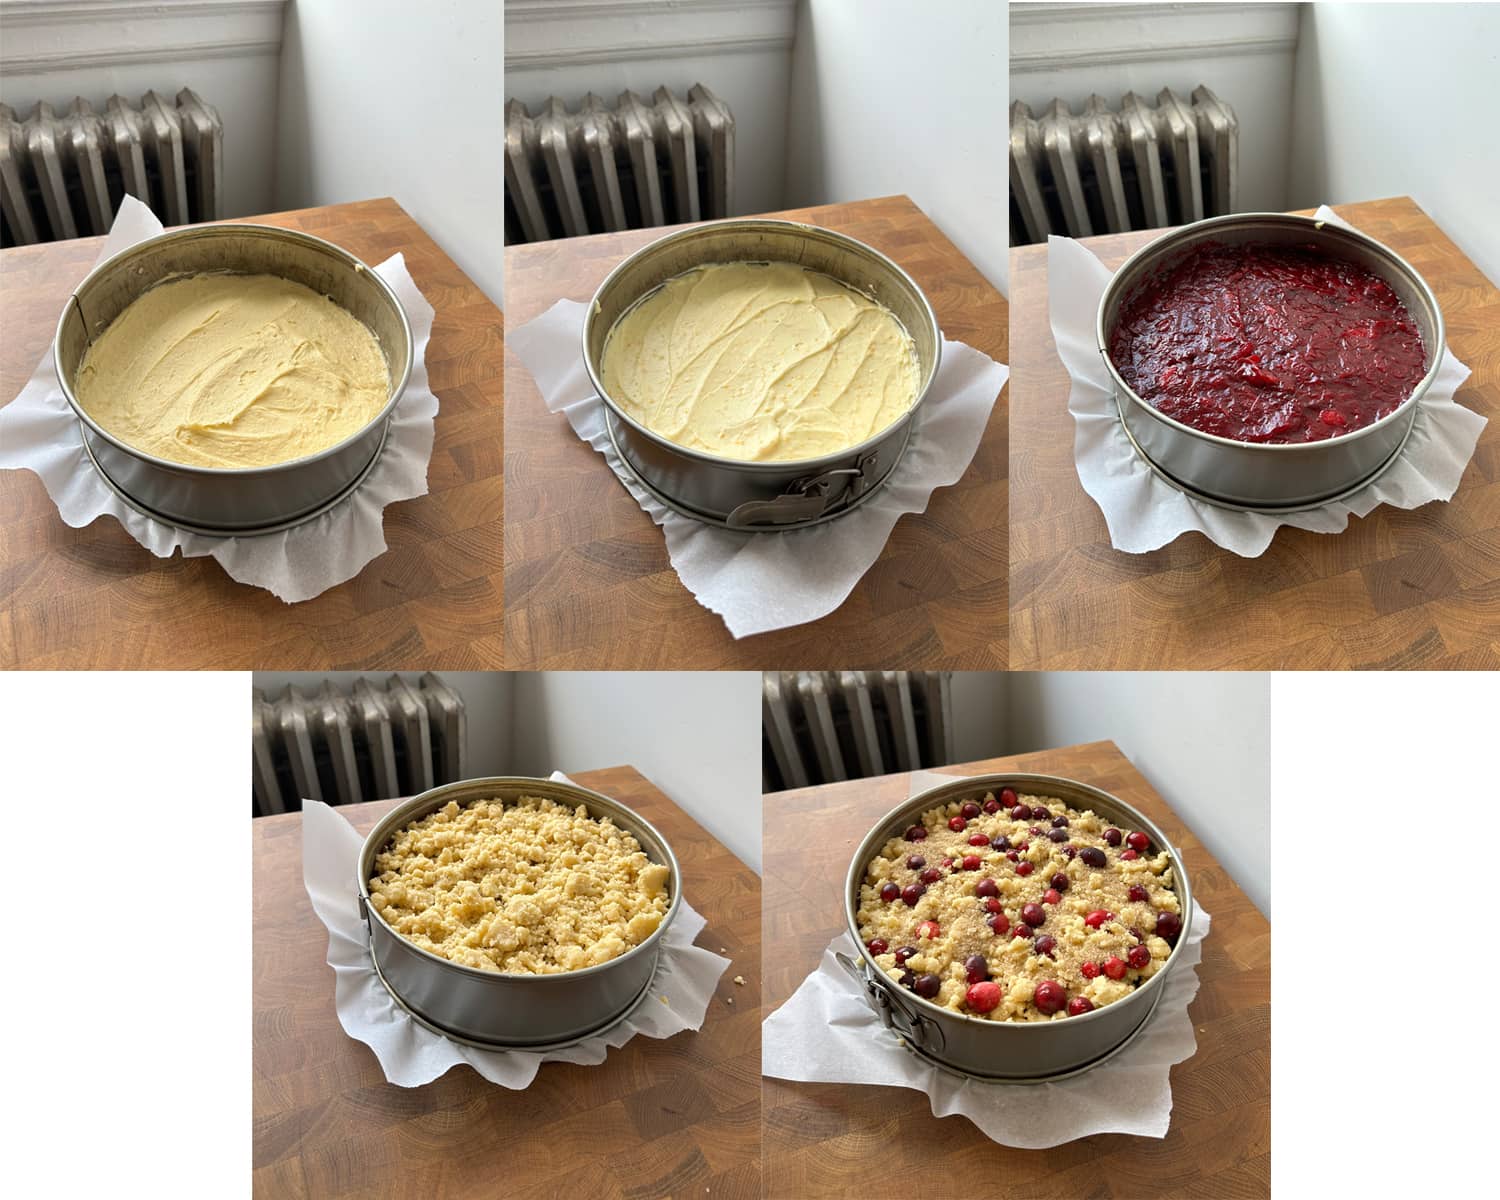 Step by step images showing how to assemble a cranberry coffee cake. 